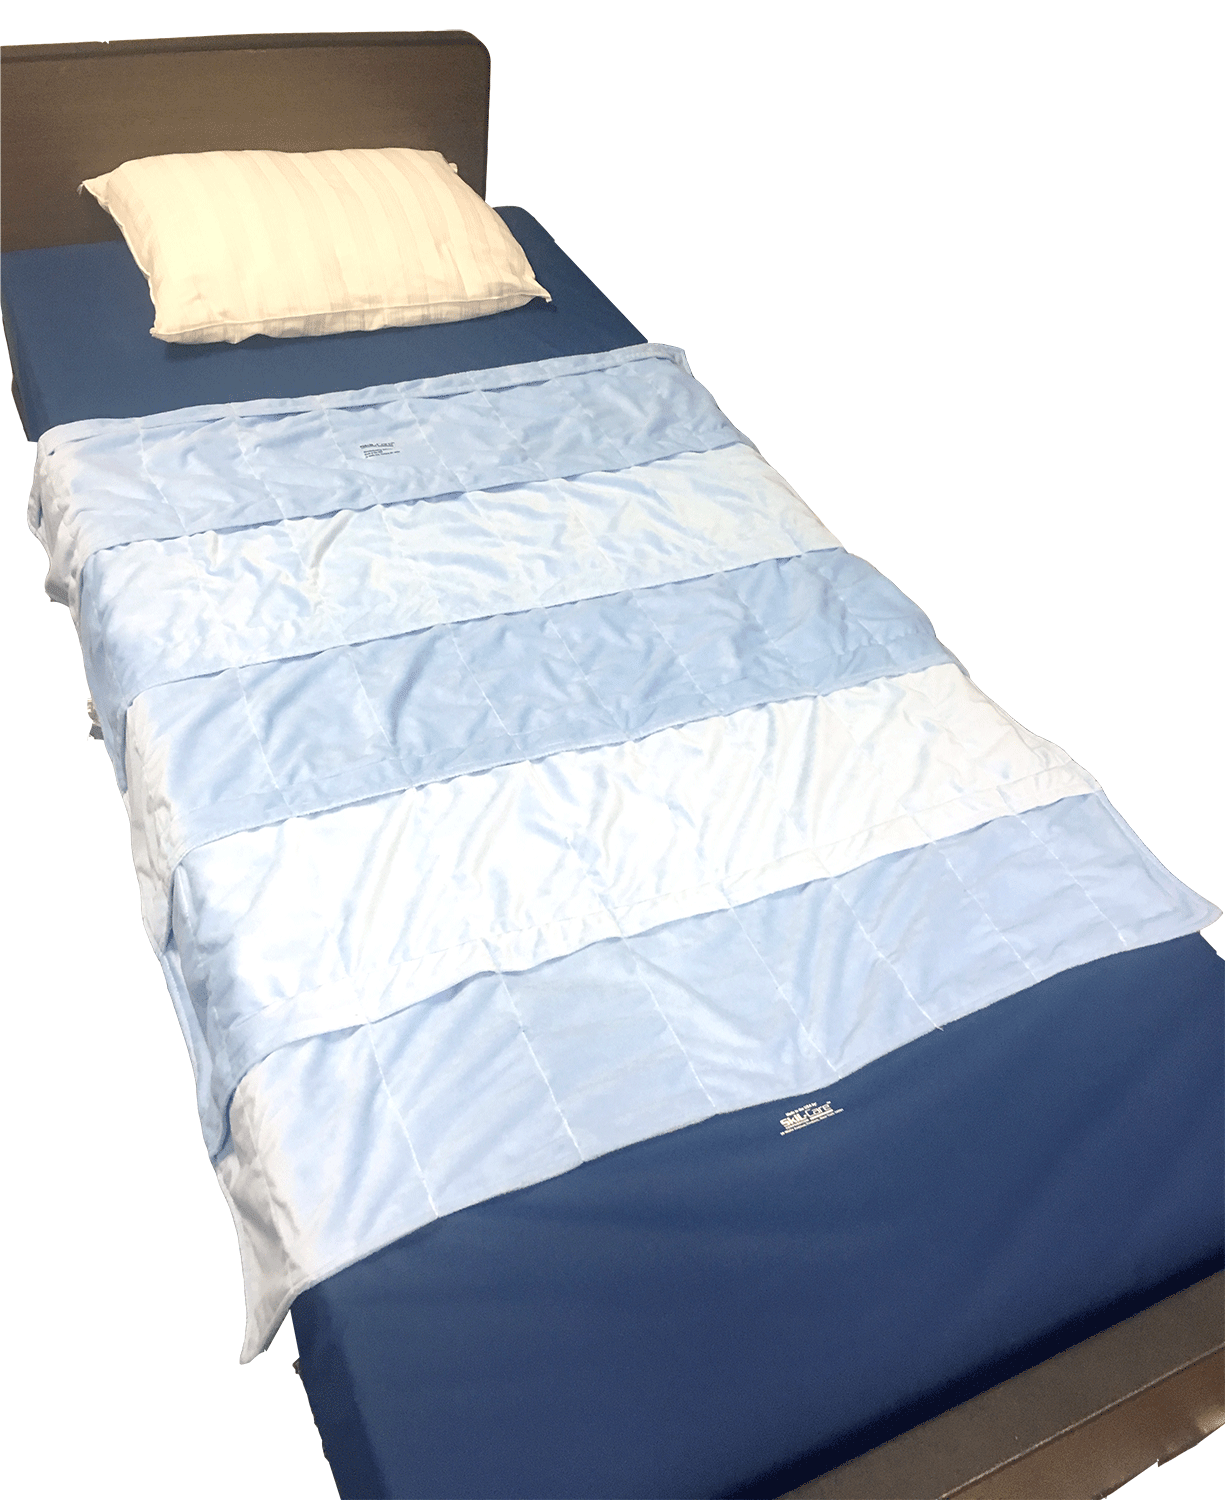 Adjustable Weighted Blanket DISCOUNT SALE - FREE Shipping